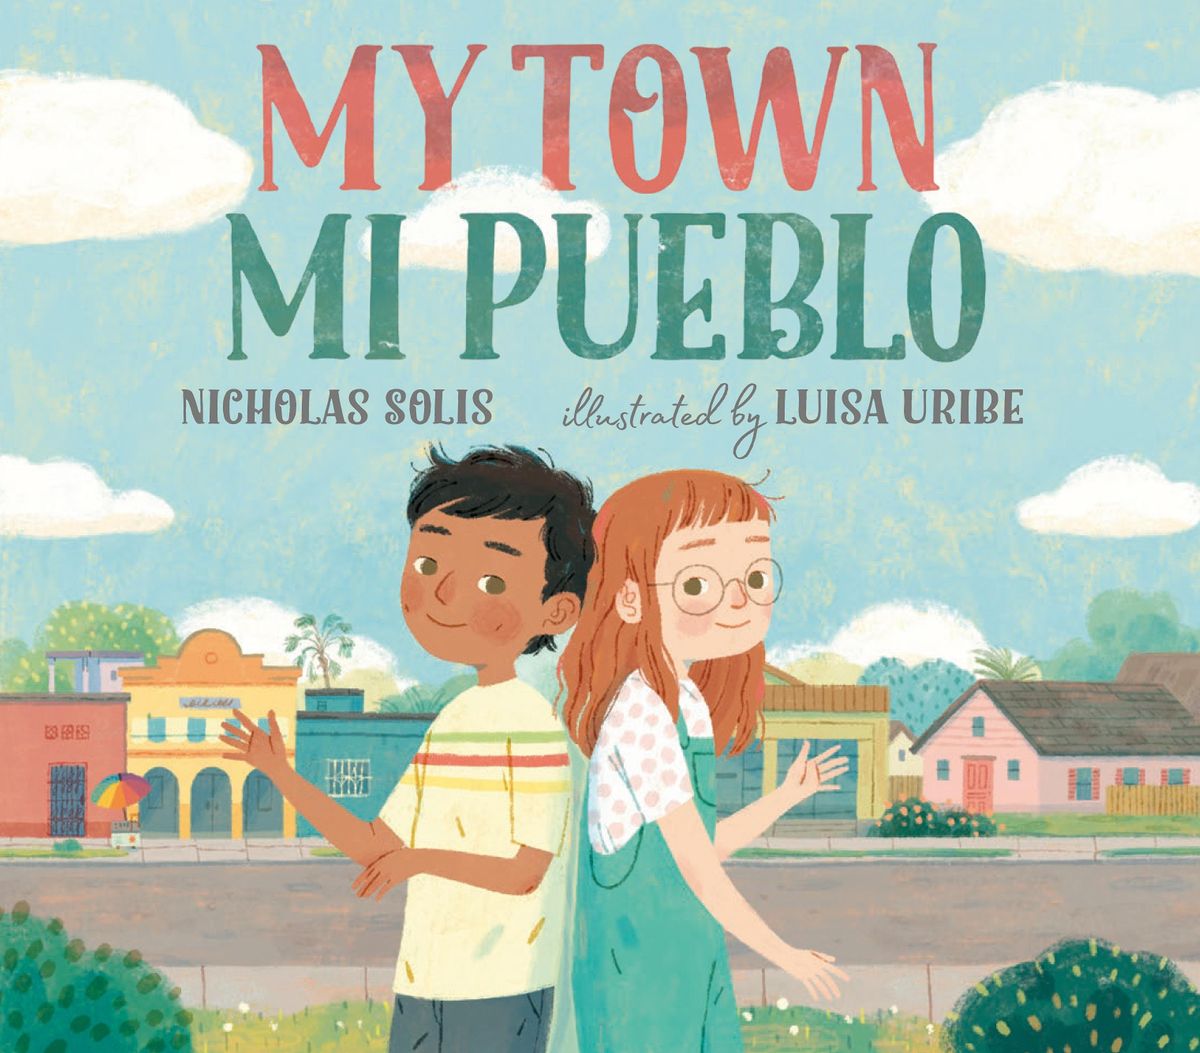 Storytime for our Littlest Readers - My Town, Mi Pueblo by Nicholas Solis